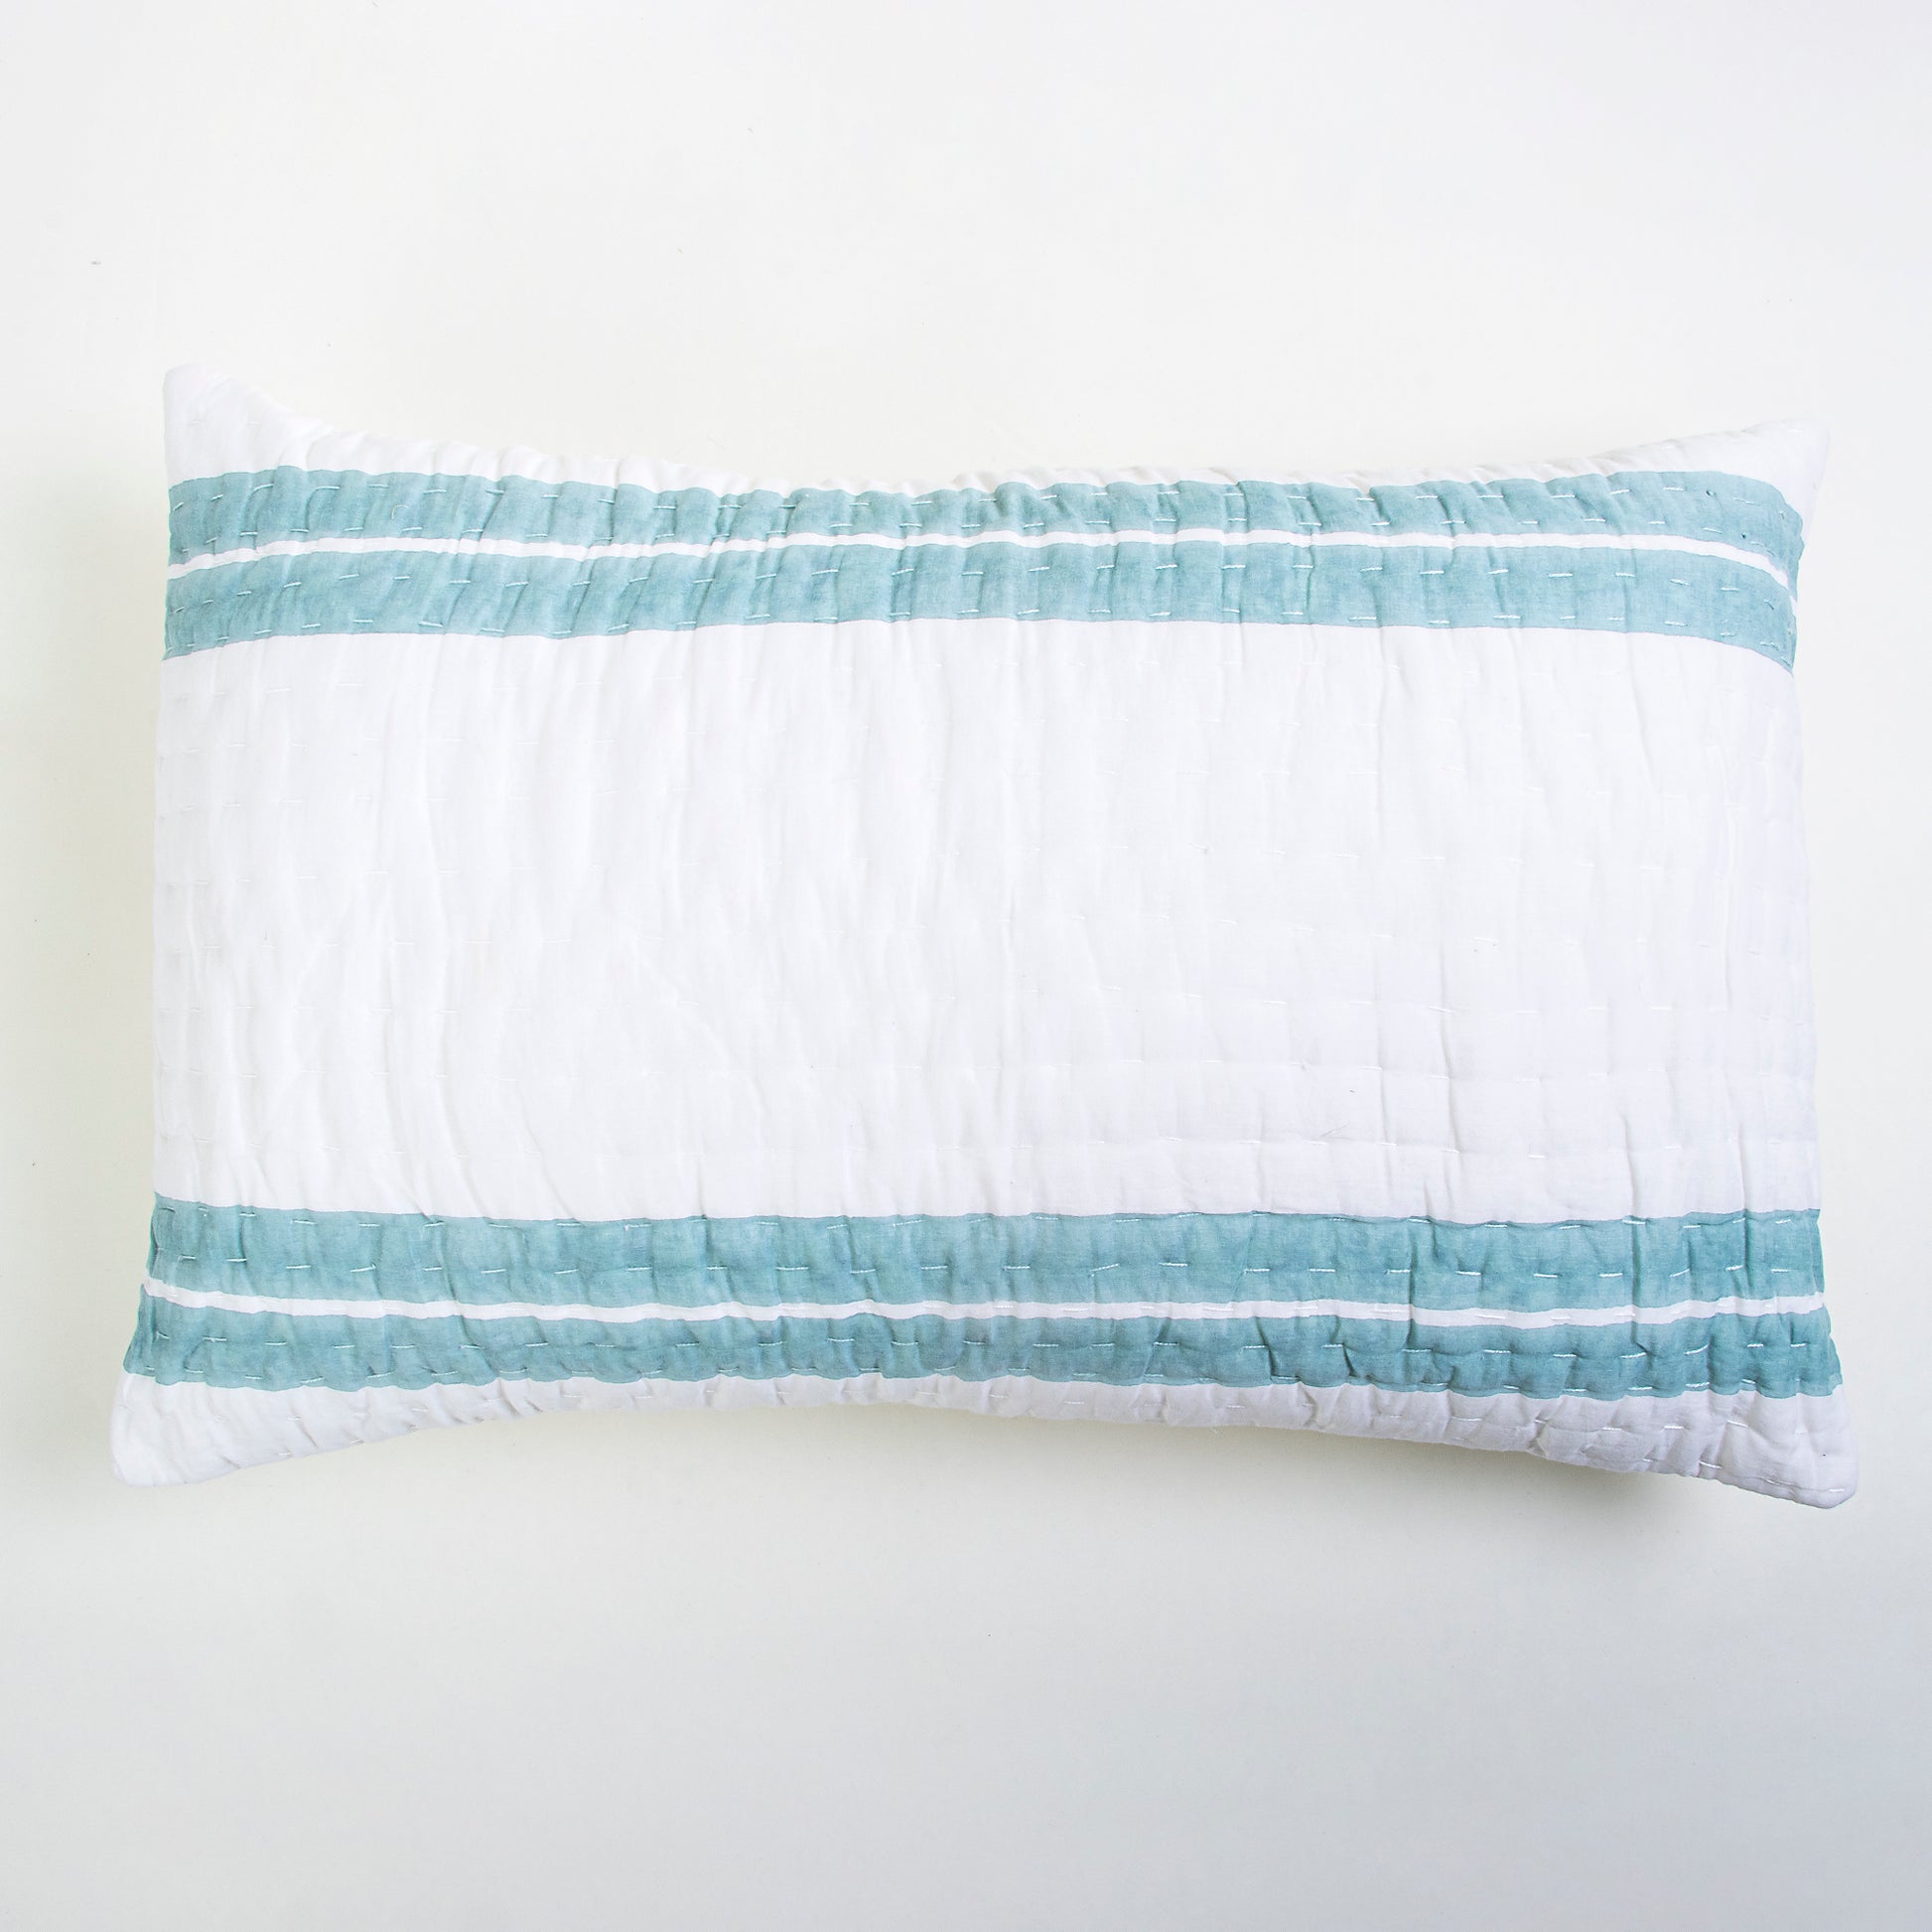 Stripe Printed Cotton Kantha Quilted Pillow Case Pattern